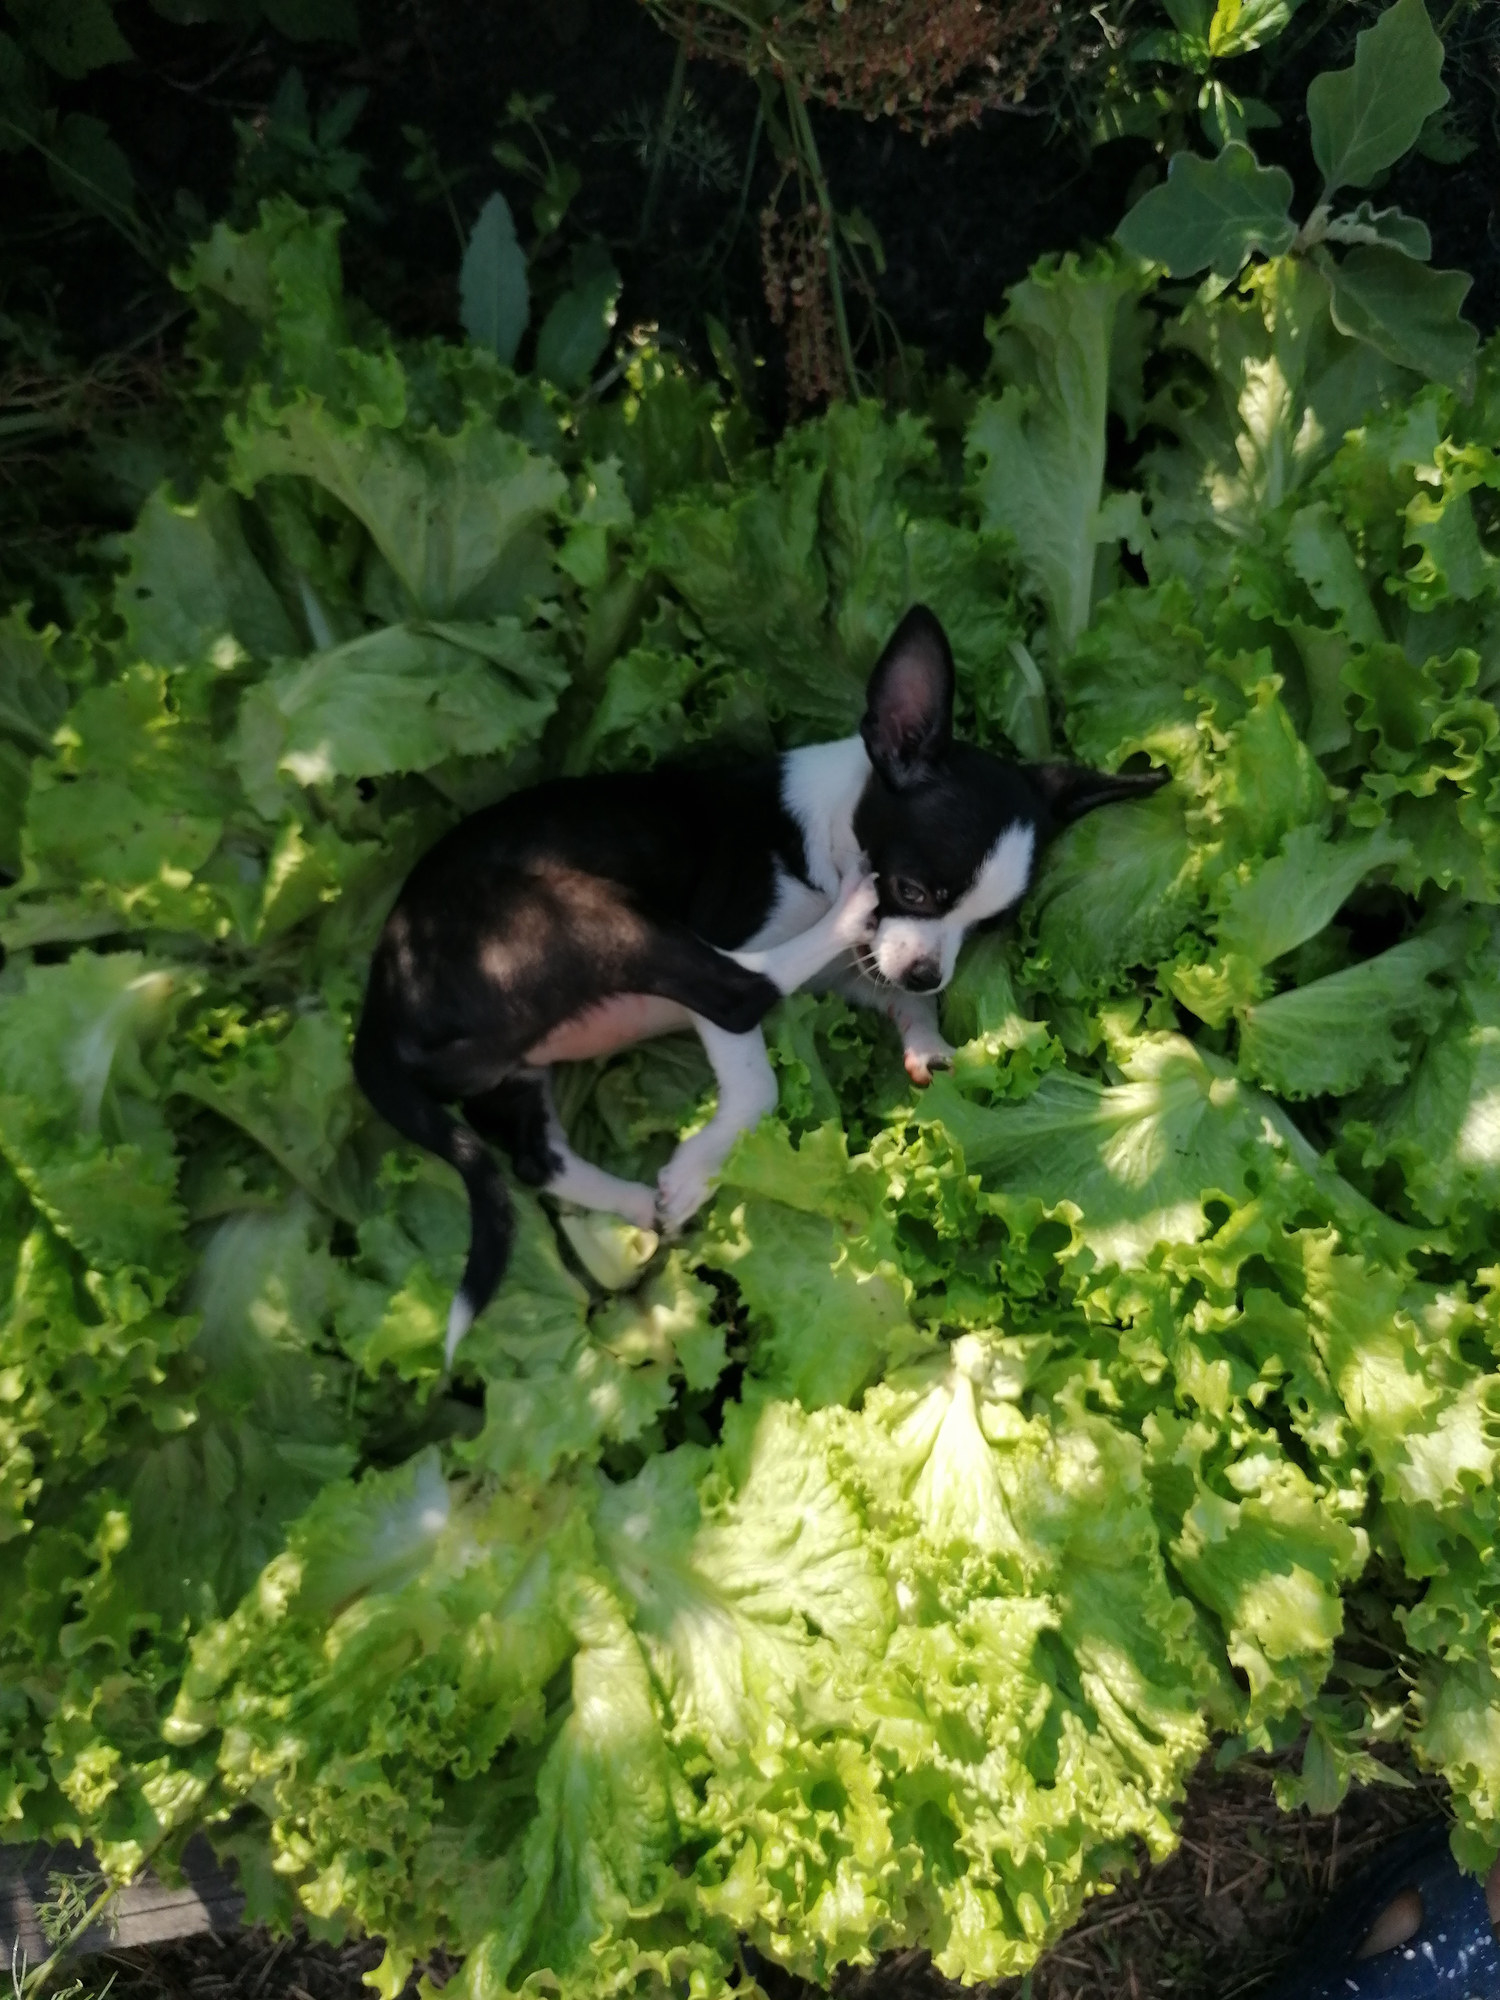 A small black and white Chihuahua puppy lying on green lettuce leaves, illuminated by the bright summer sun.